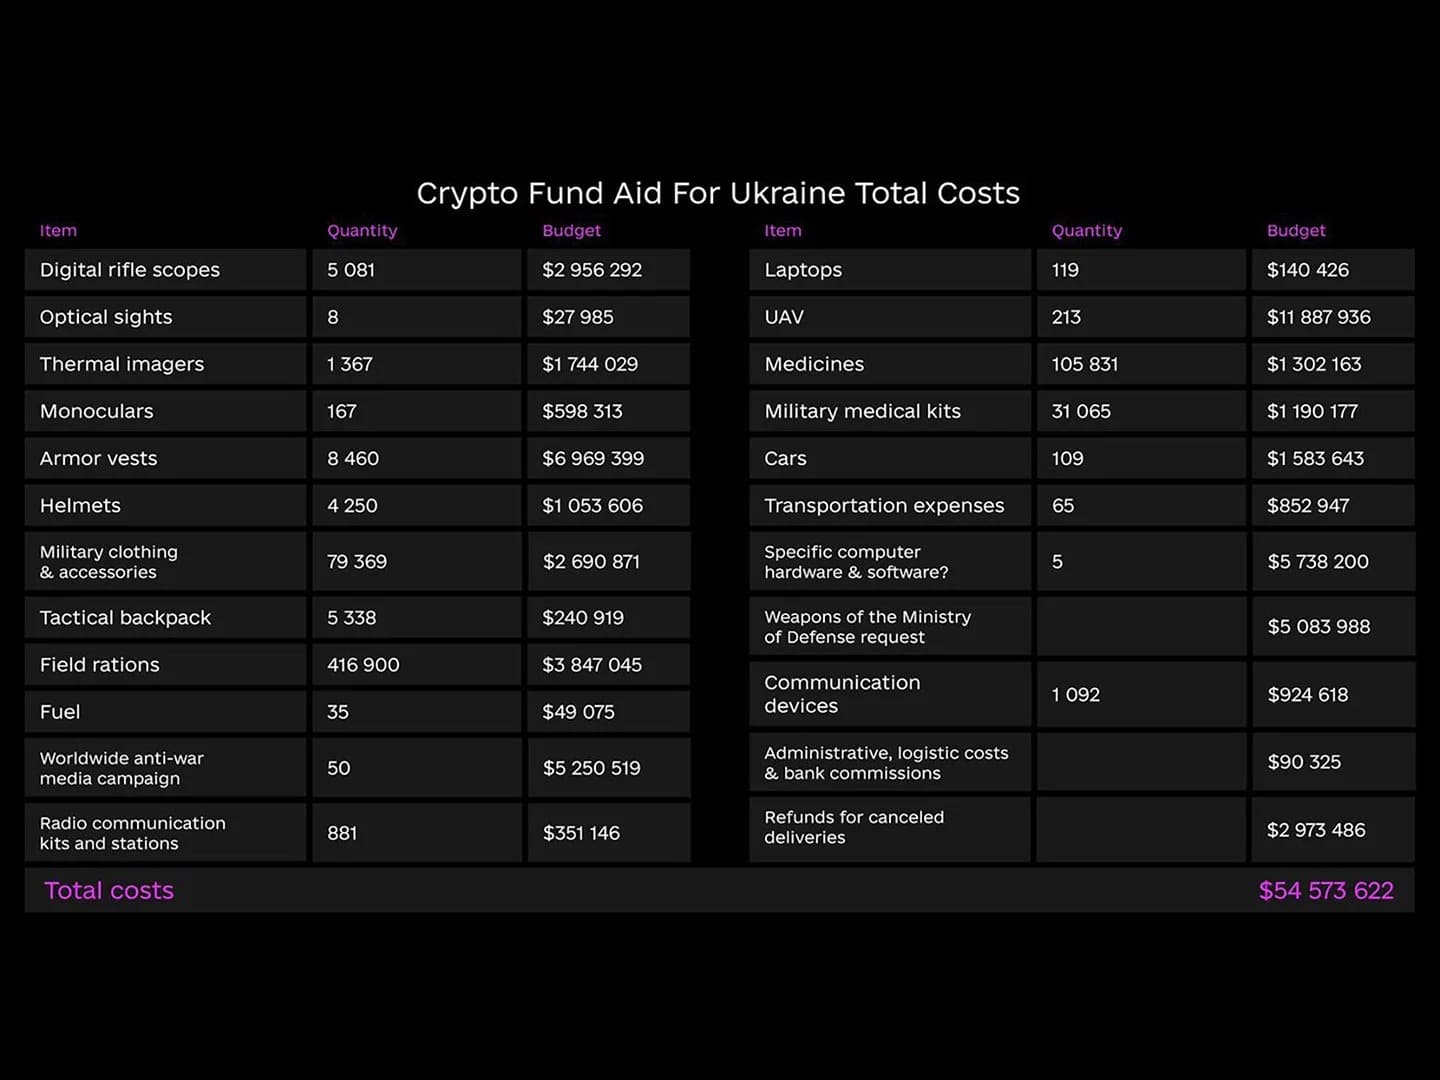 Breakdown of cryptocurrency donations made to Ukraine